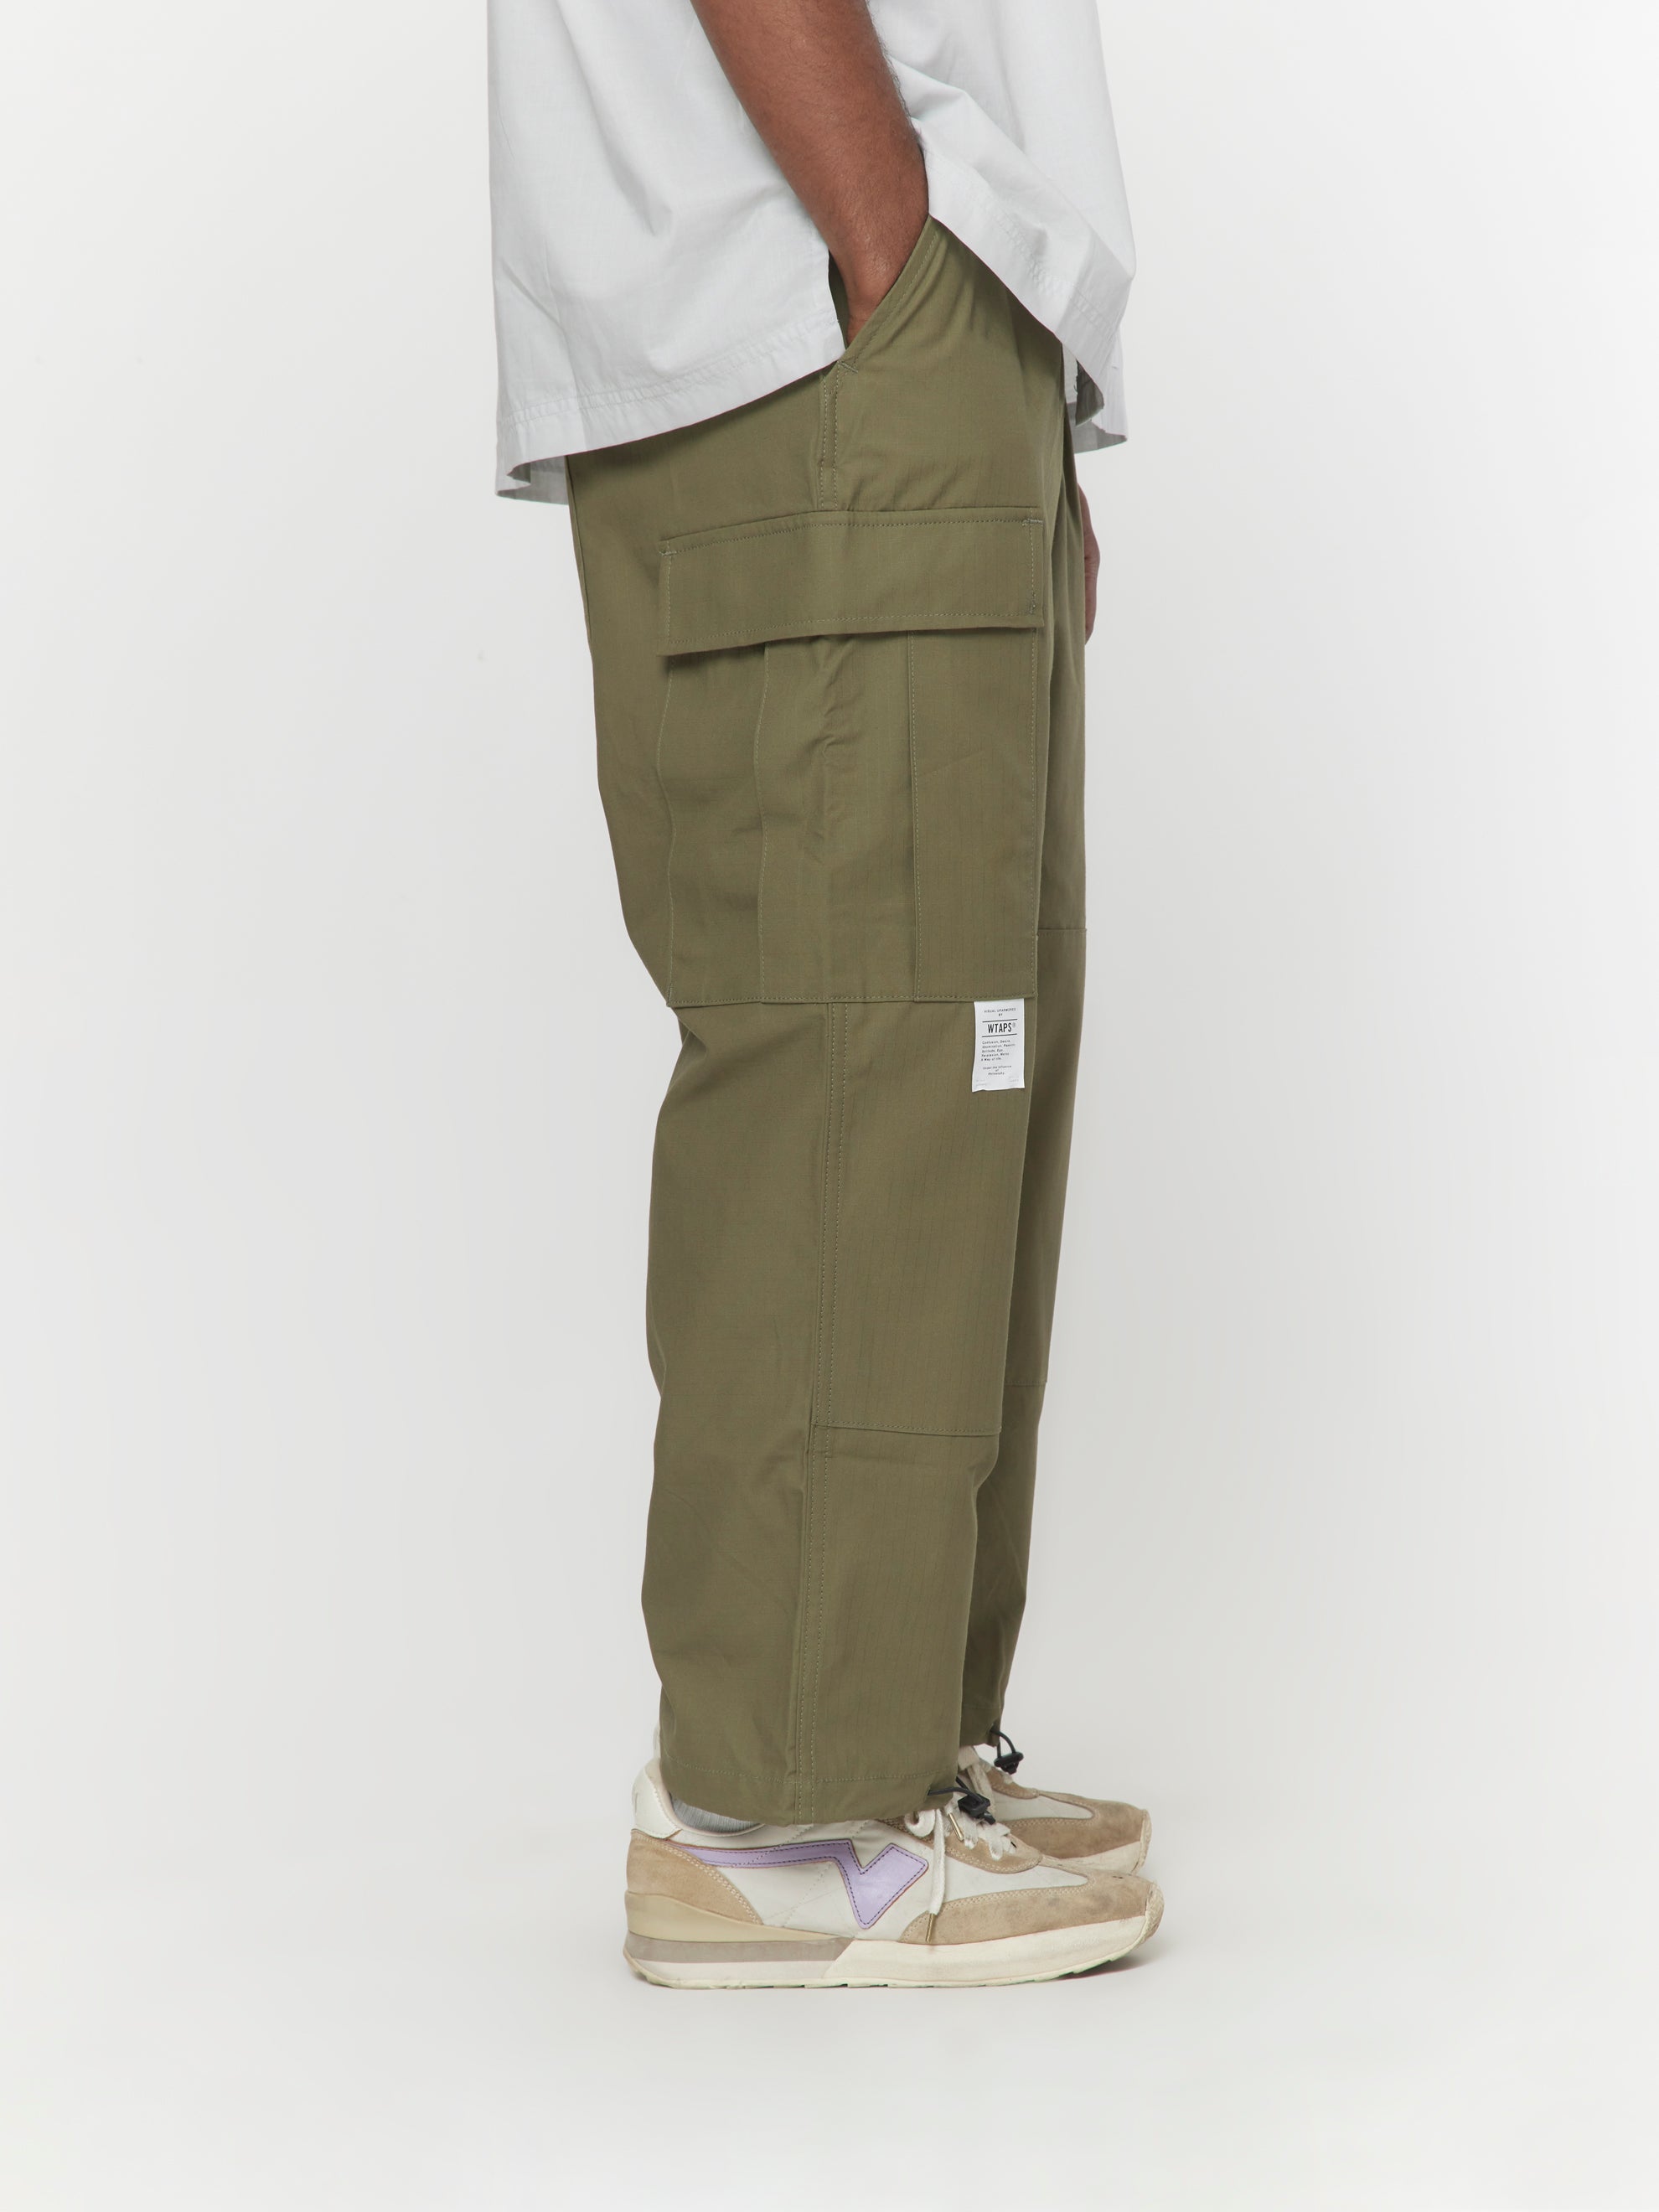 Buy Wtaps TROUSERS 15 (Olive Drab) Online at UNION LOS ANGELES